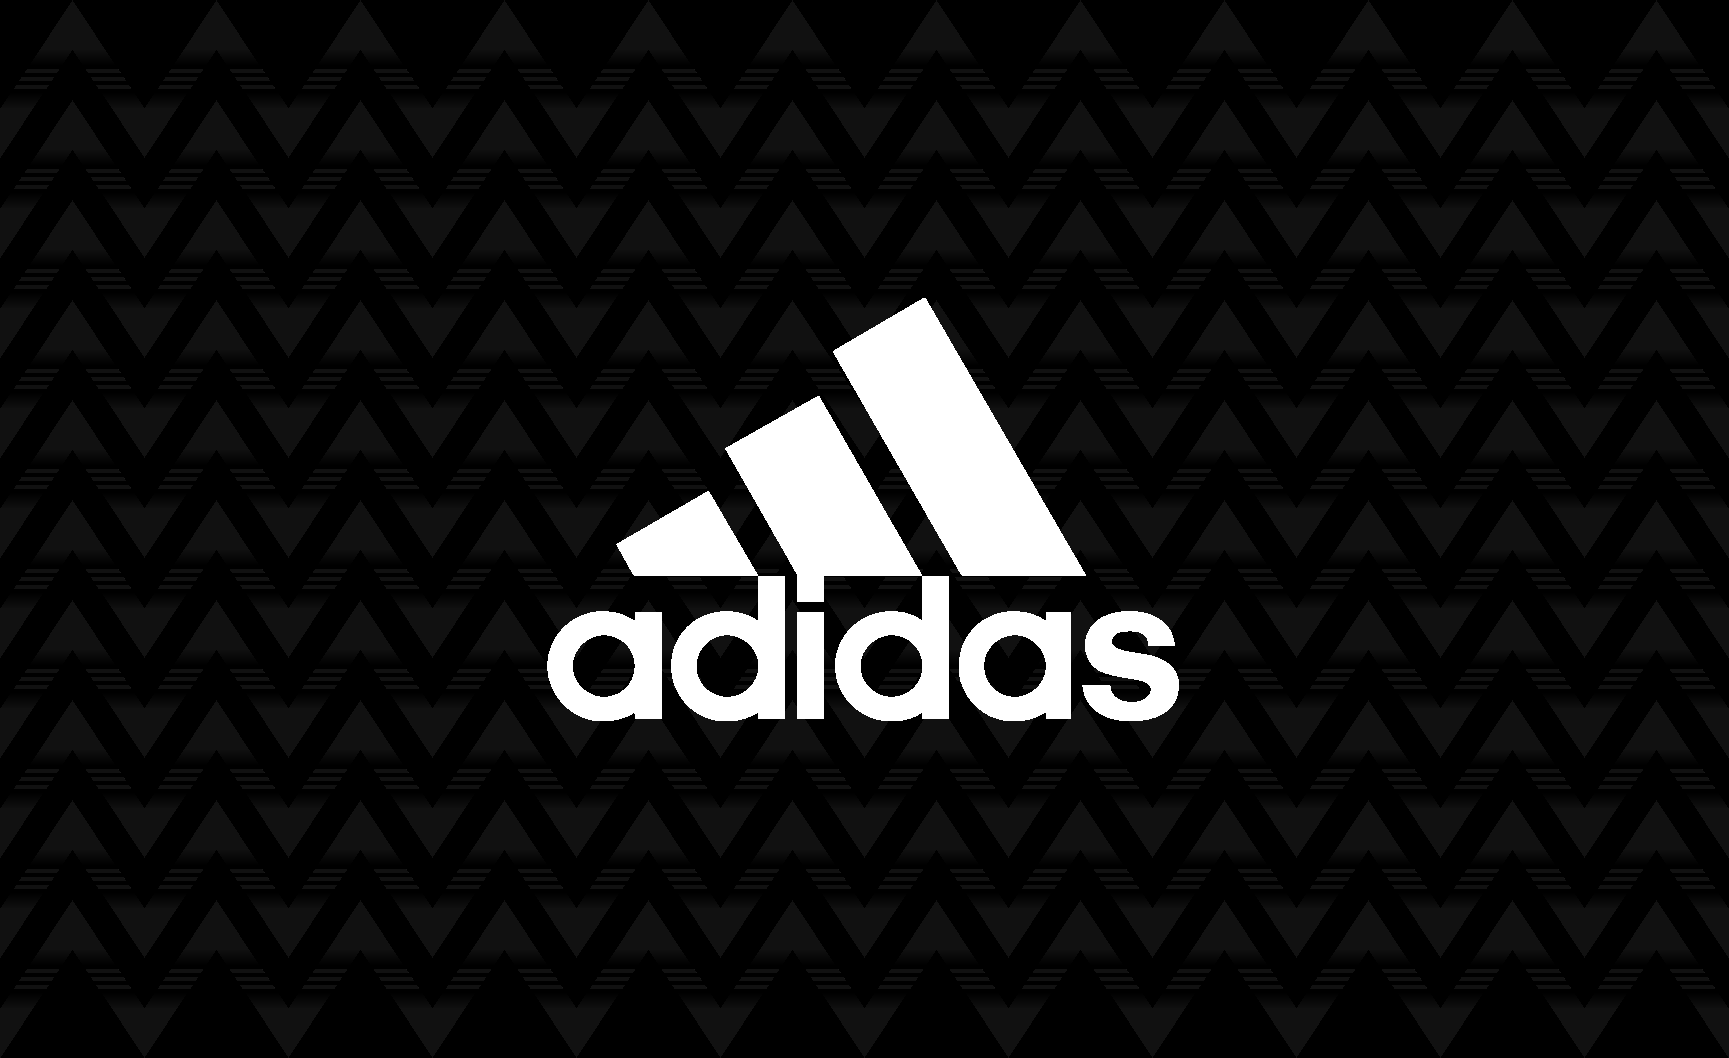 Adidas Soccer Logo - Adidas Universal Soccer Template (In Stand-By) - Concepts - Chris ...